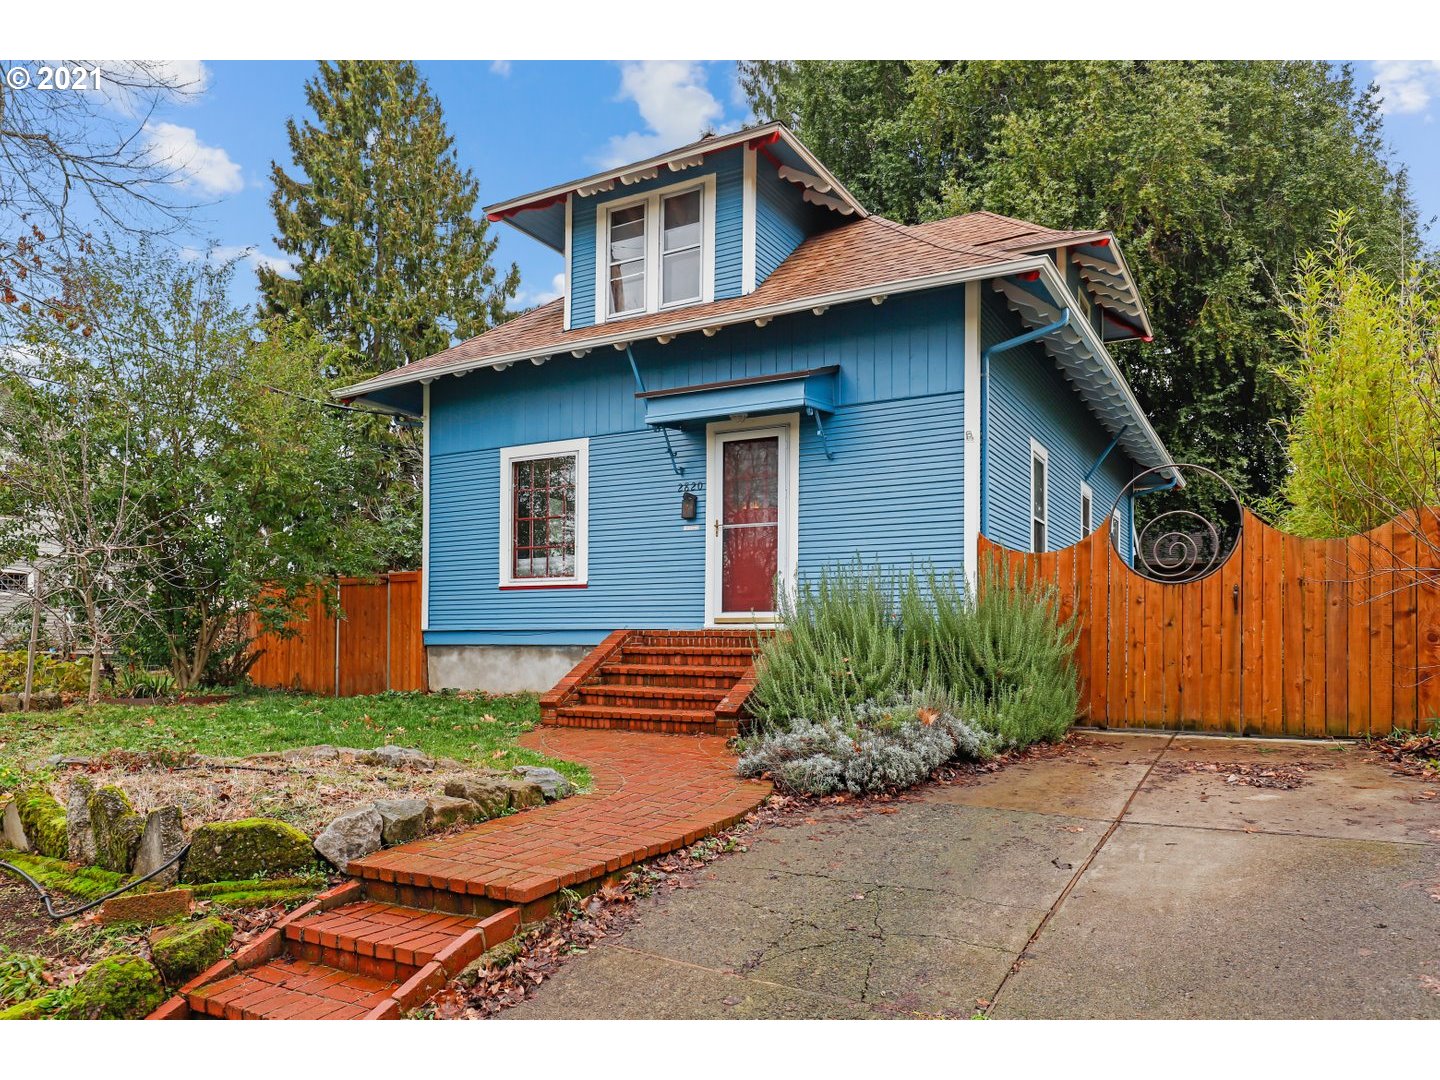 2820 SE 47TH AVE (1 of 32)